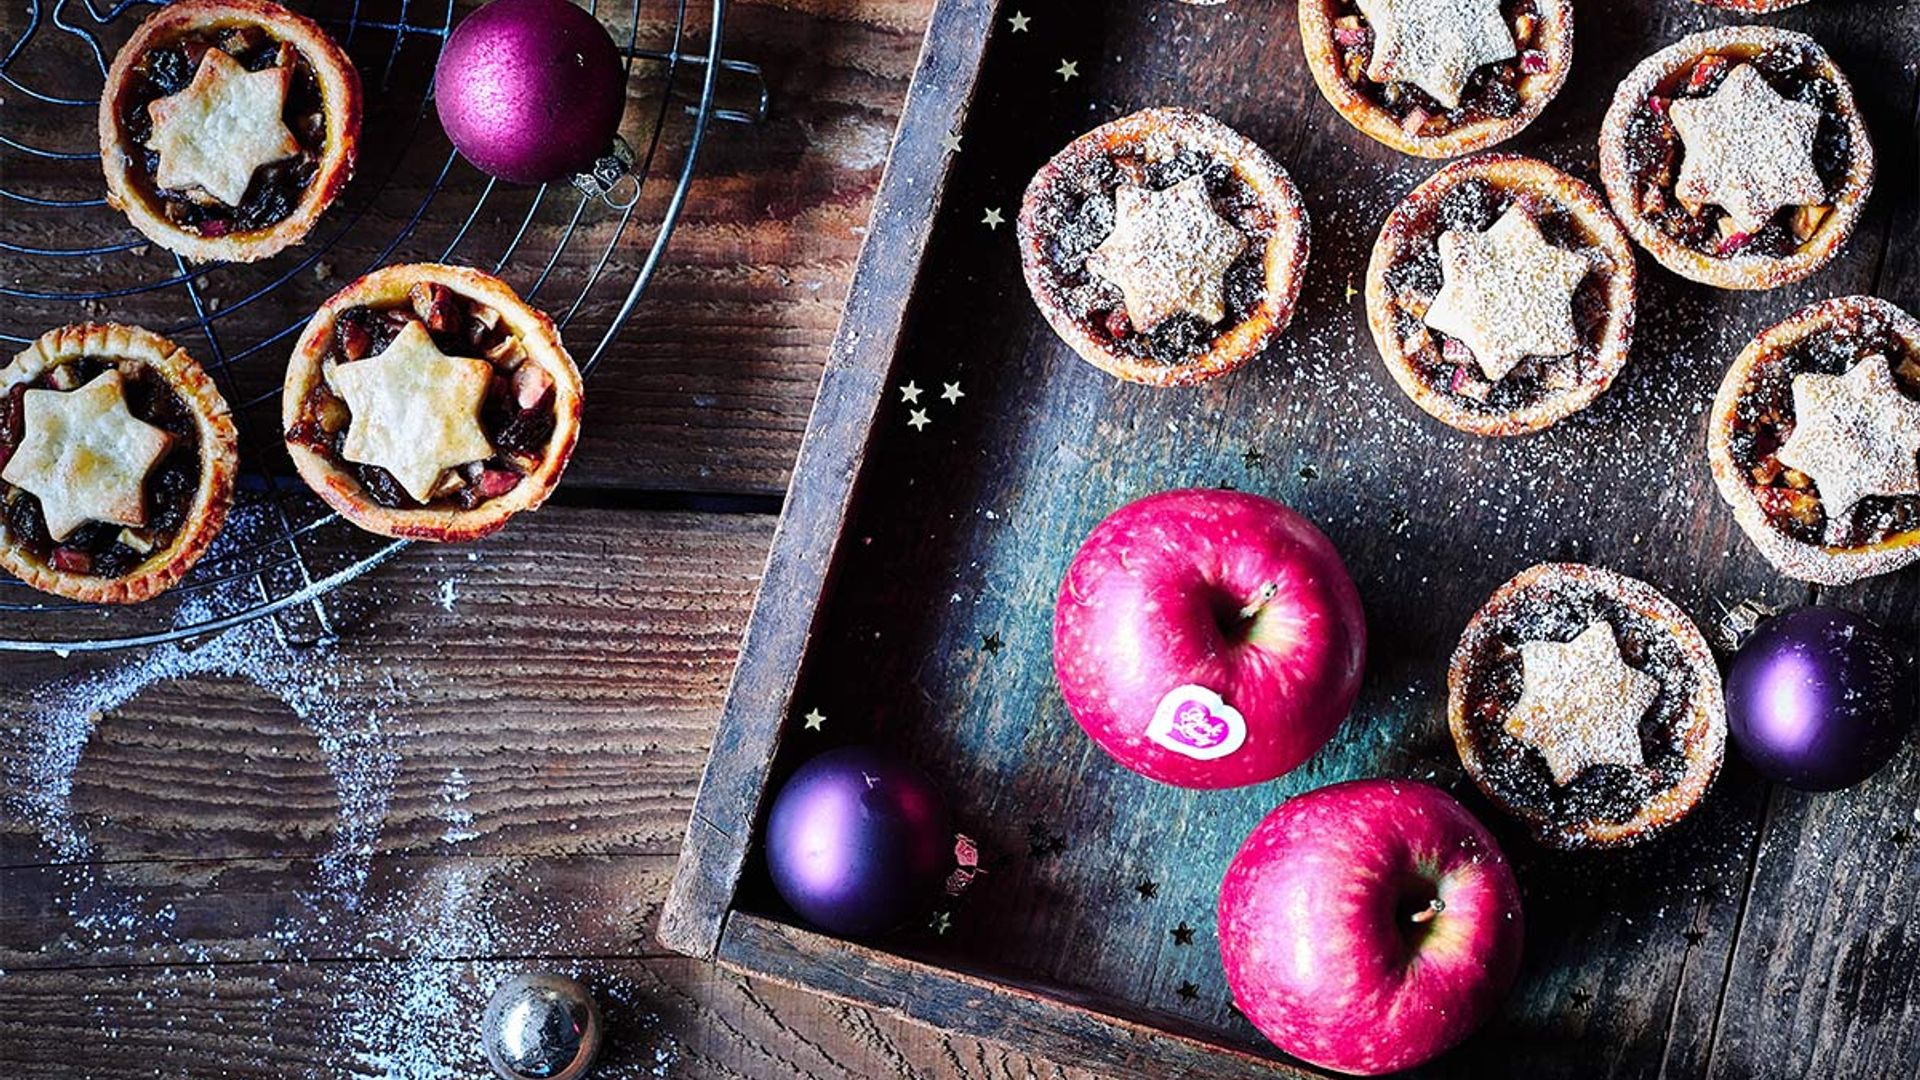 These apple mince pies are divine for Christmas – try the recipes here!